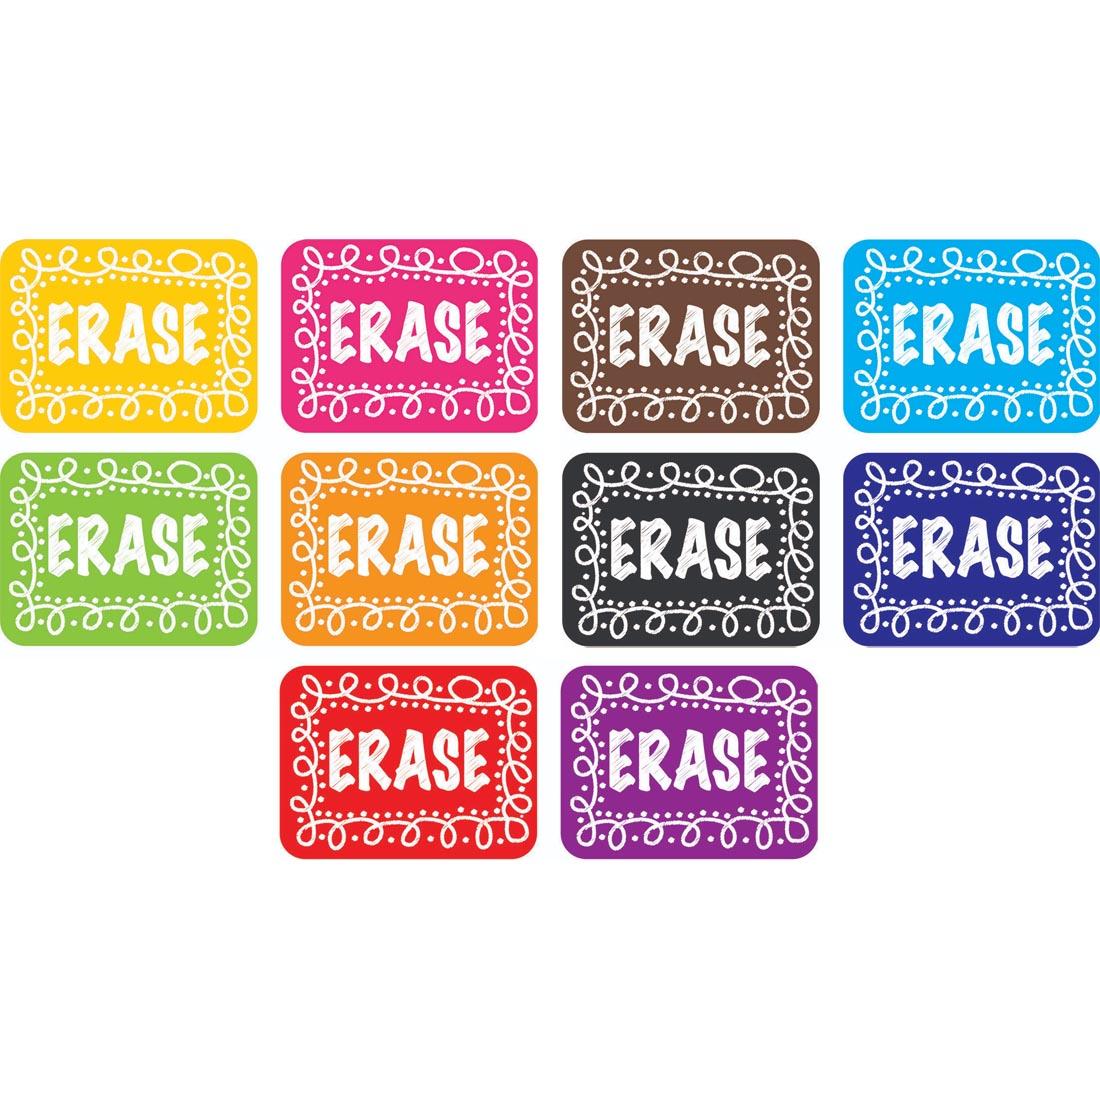 Set of 10 whiteboard erasers with the word Erase on them